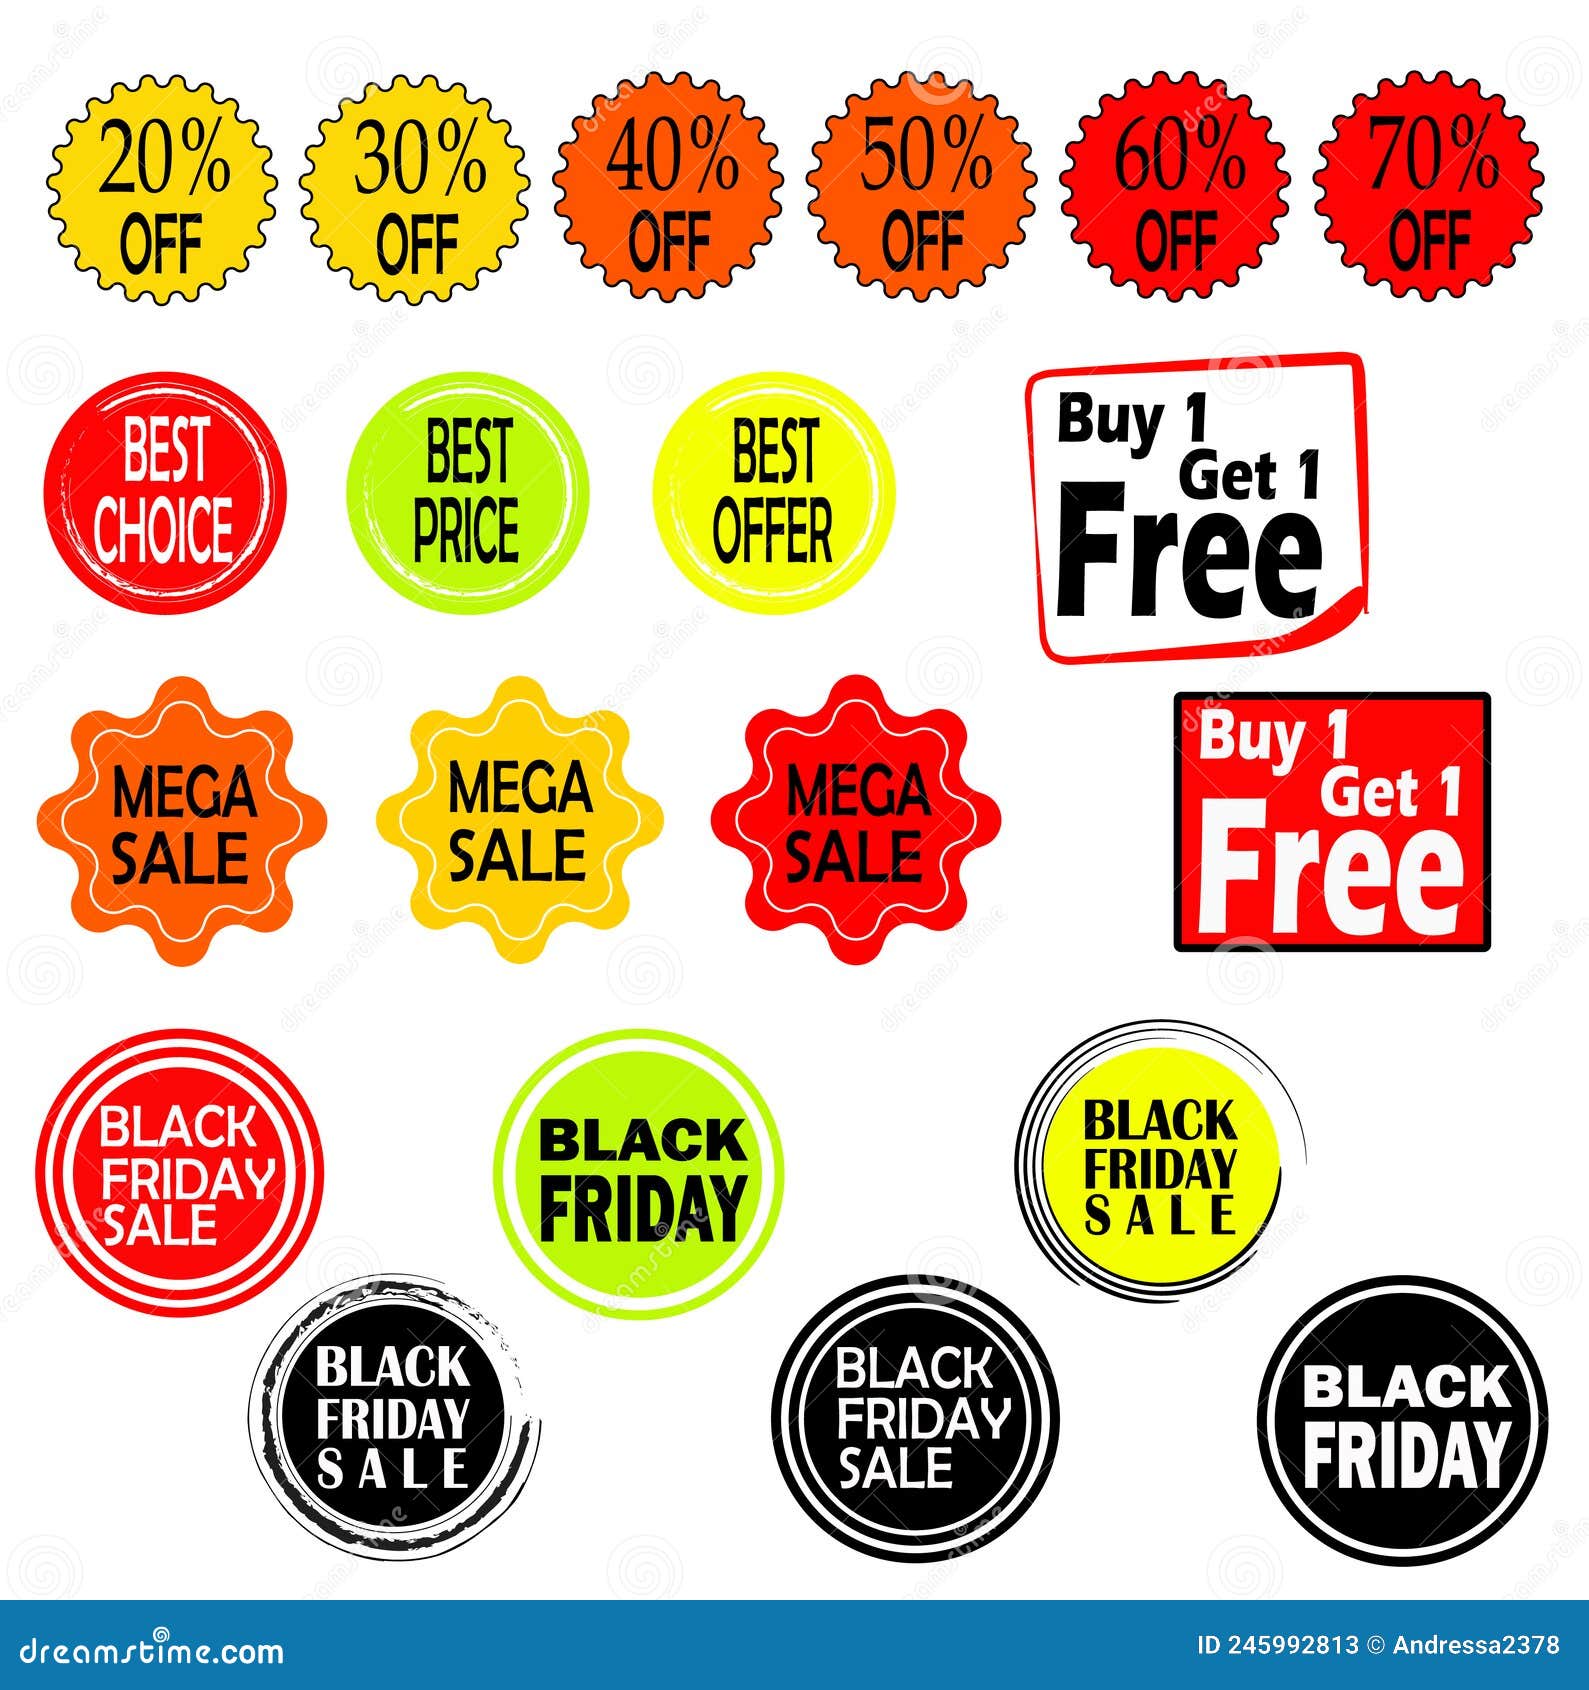 Promotional Stickers for Black Friday